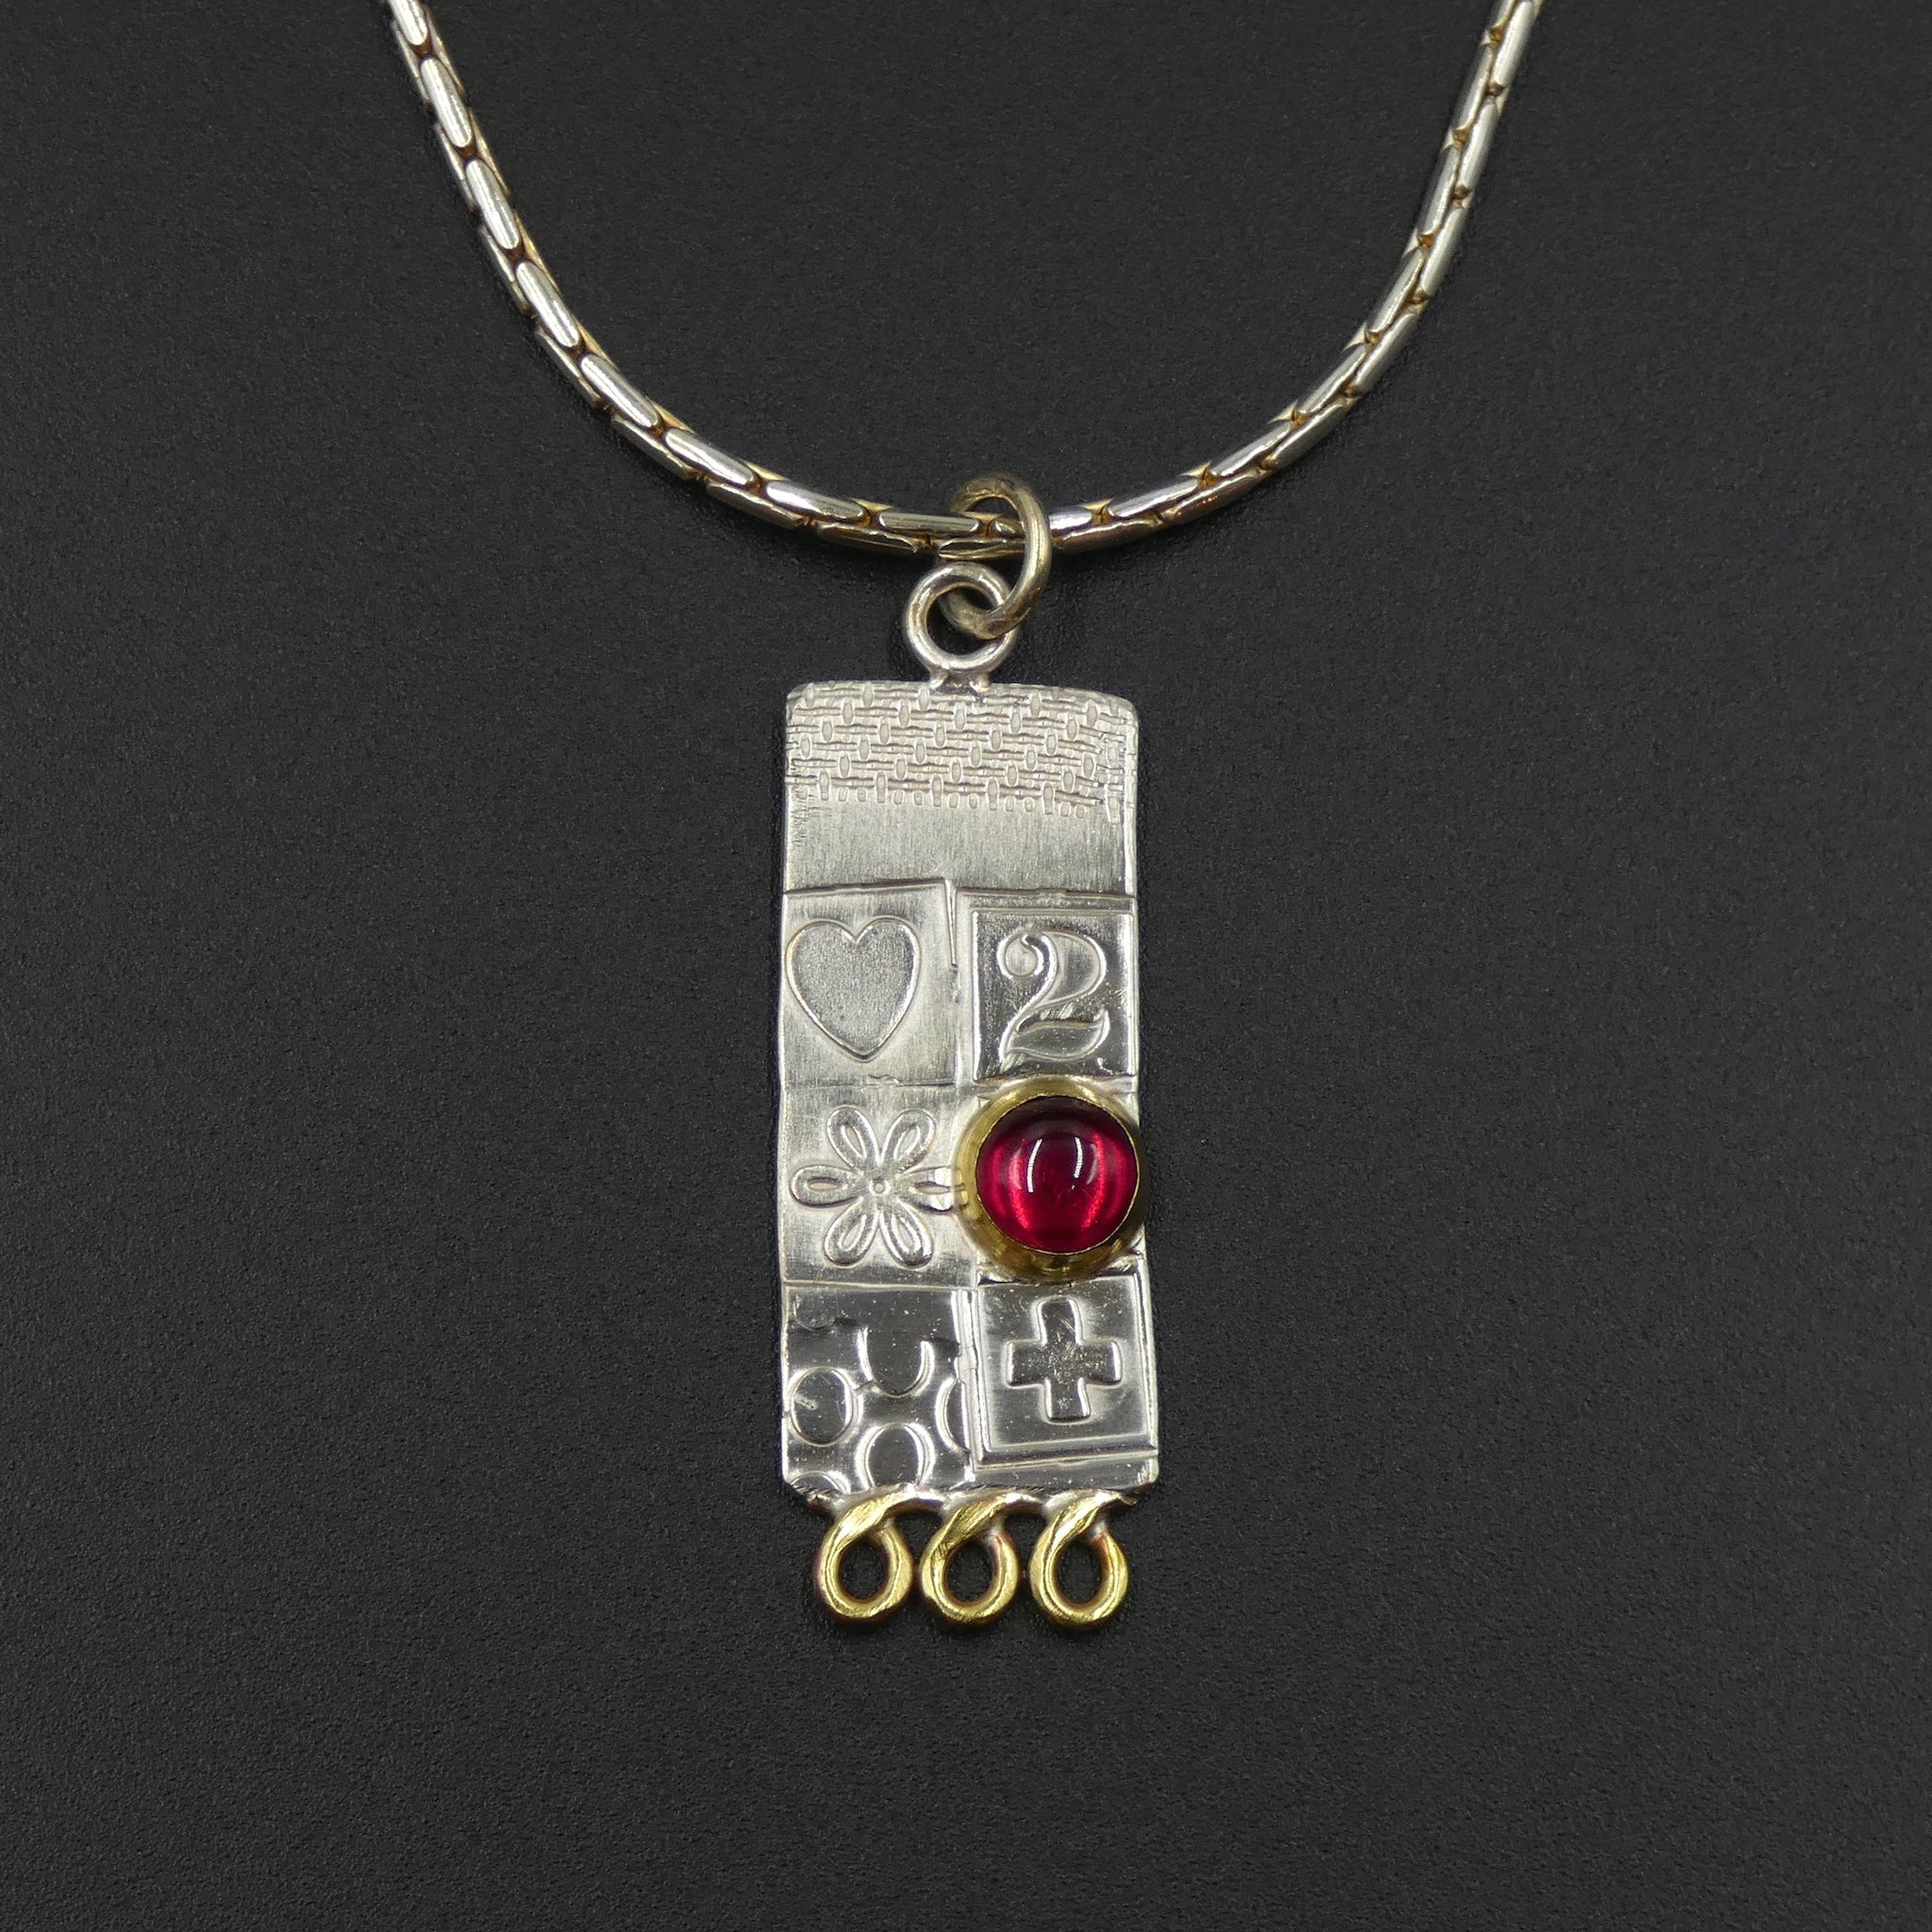 Large pendant by jewellers John and Dawn Field